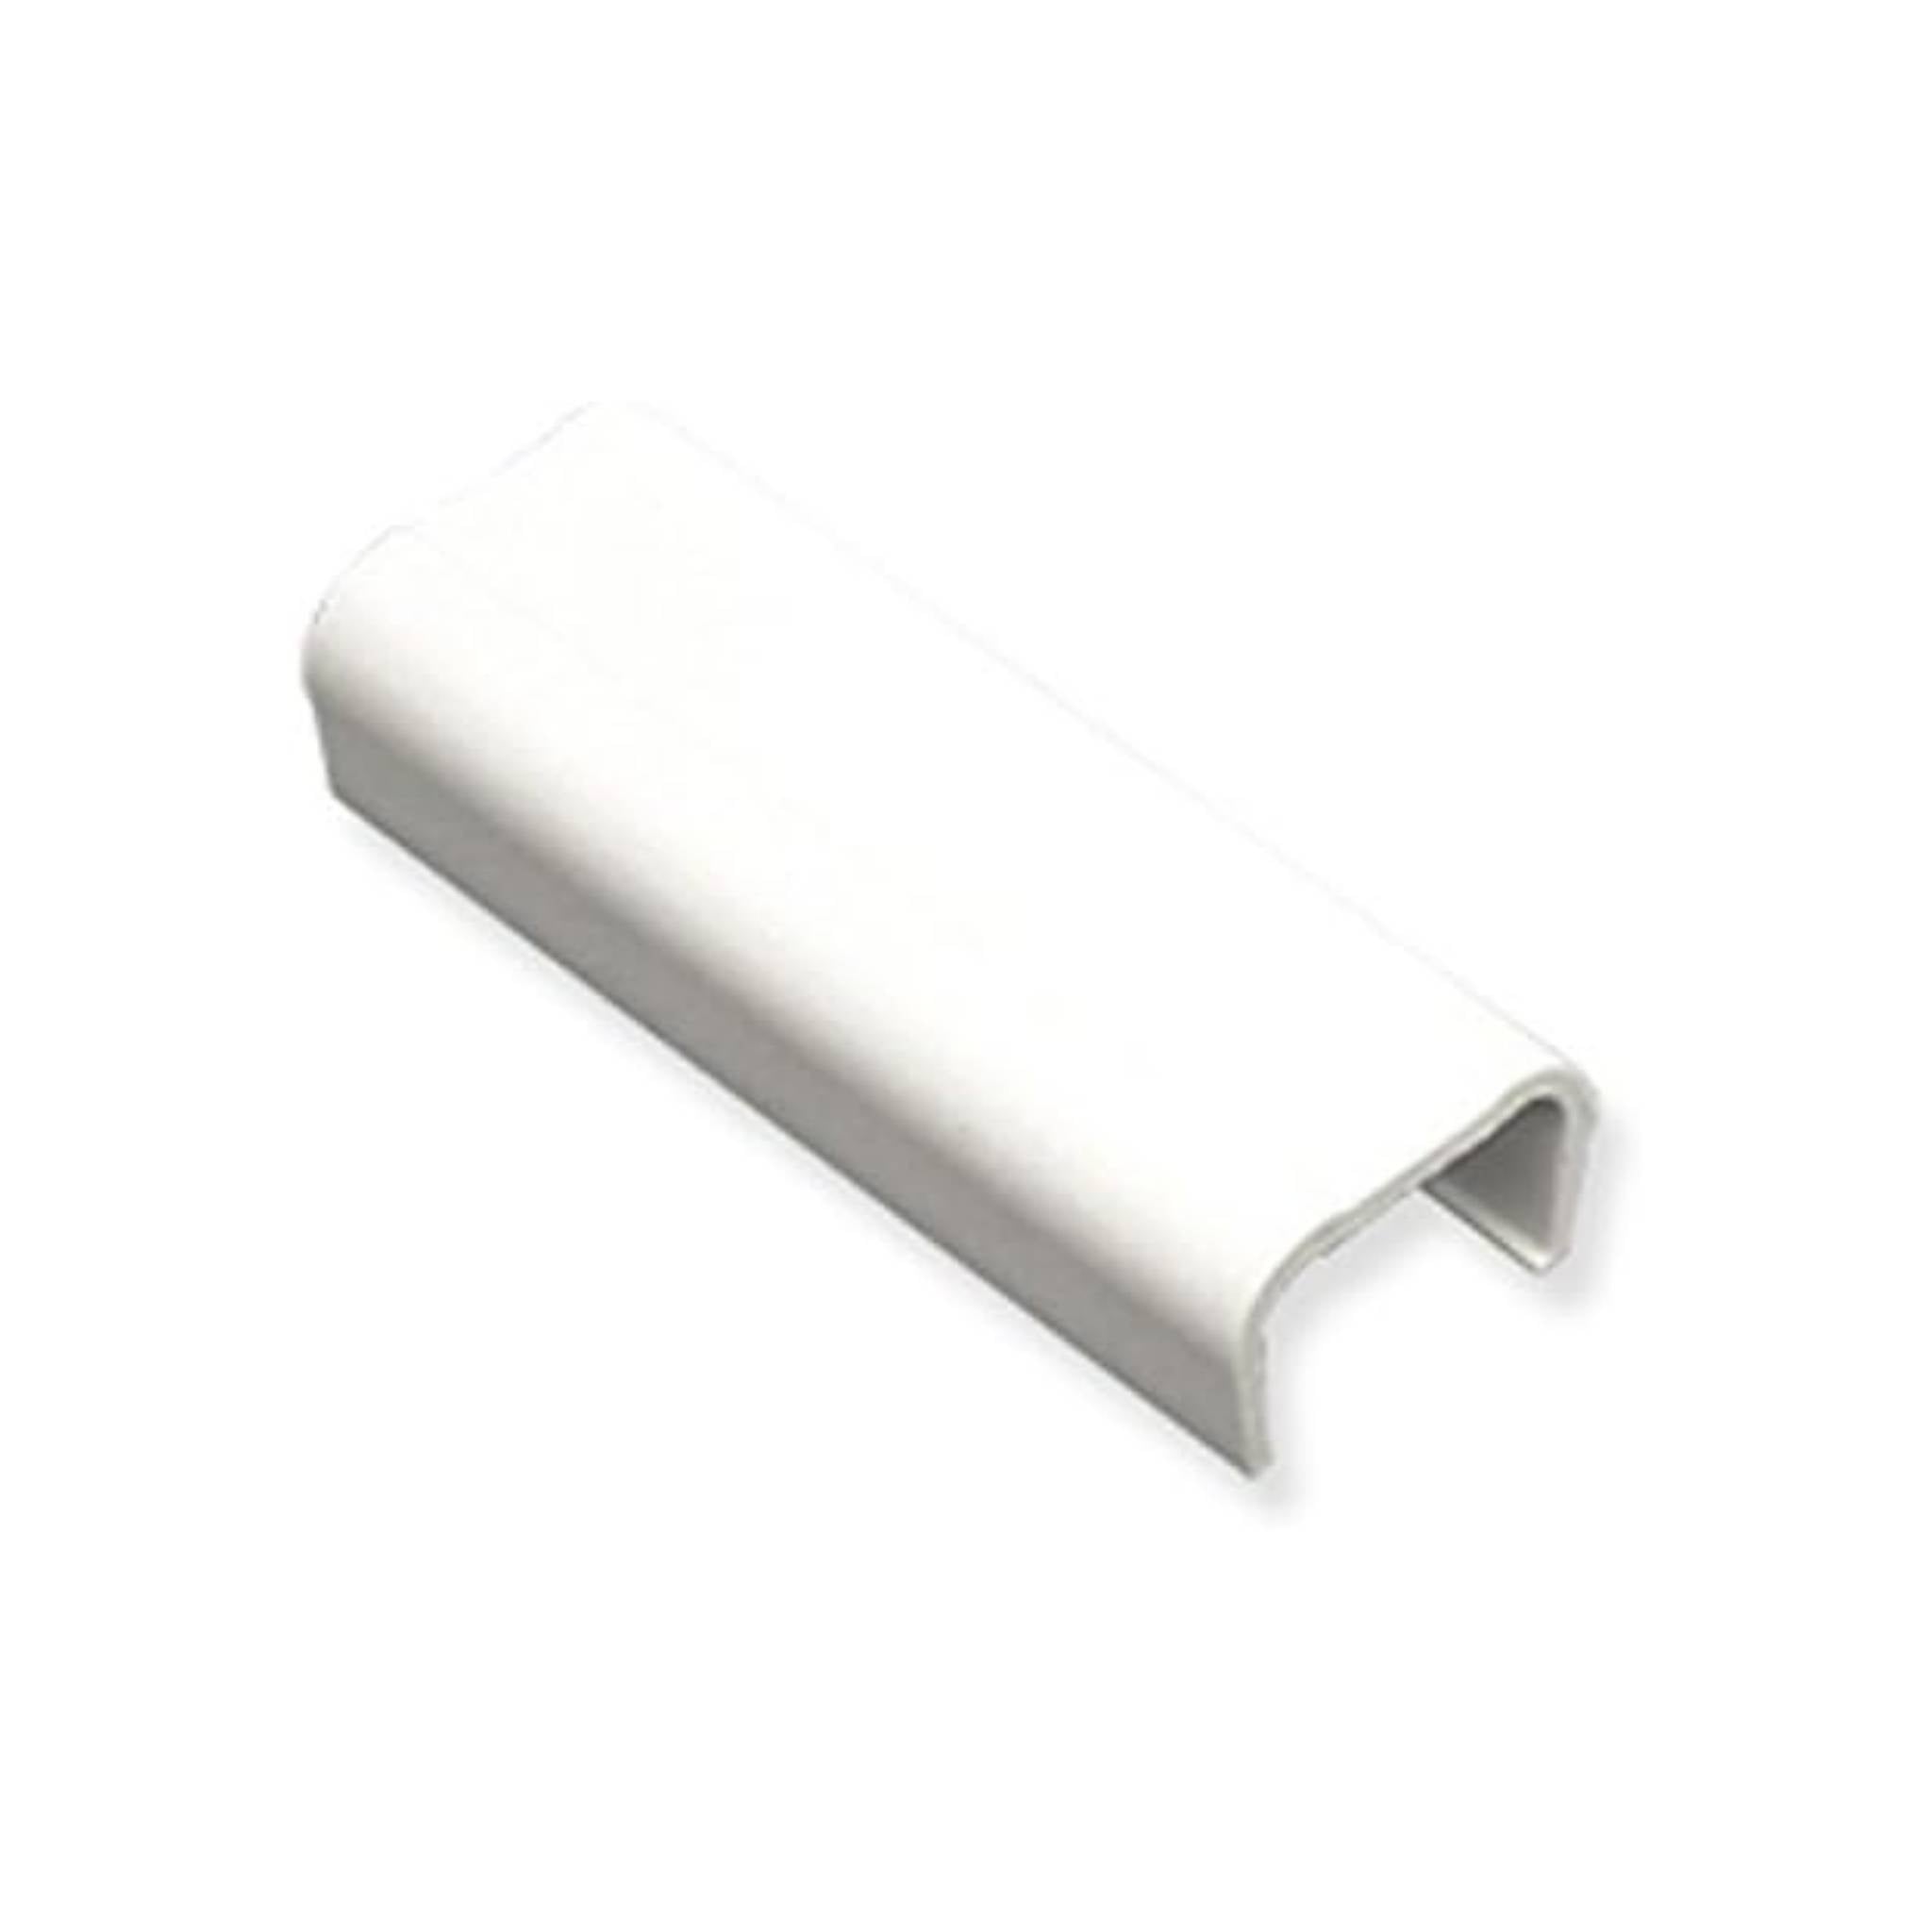 ICC Joint Cover, 1 1/4", White,